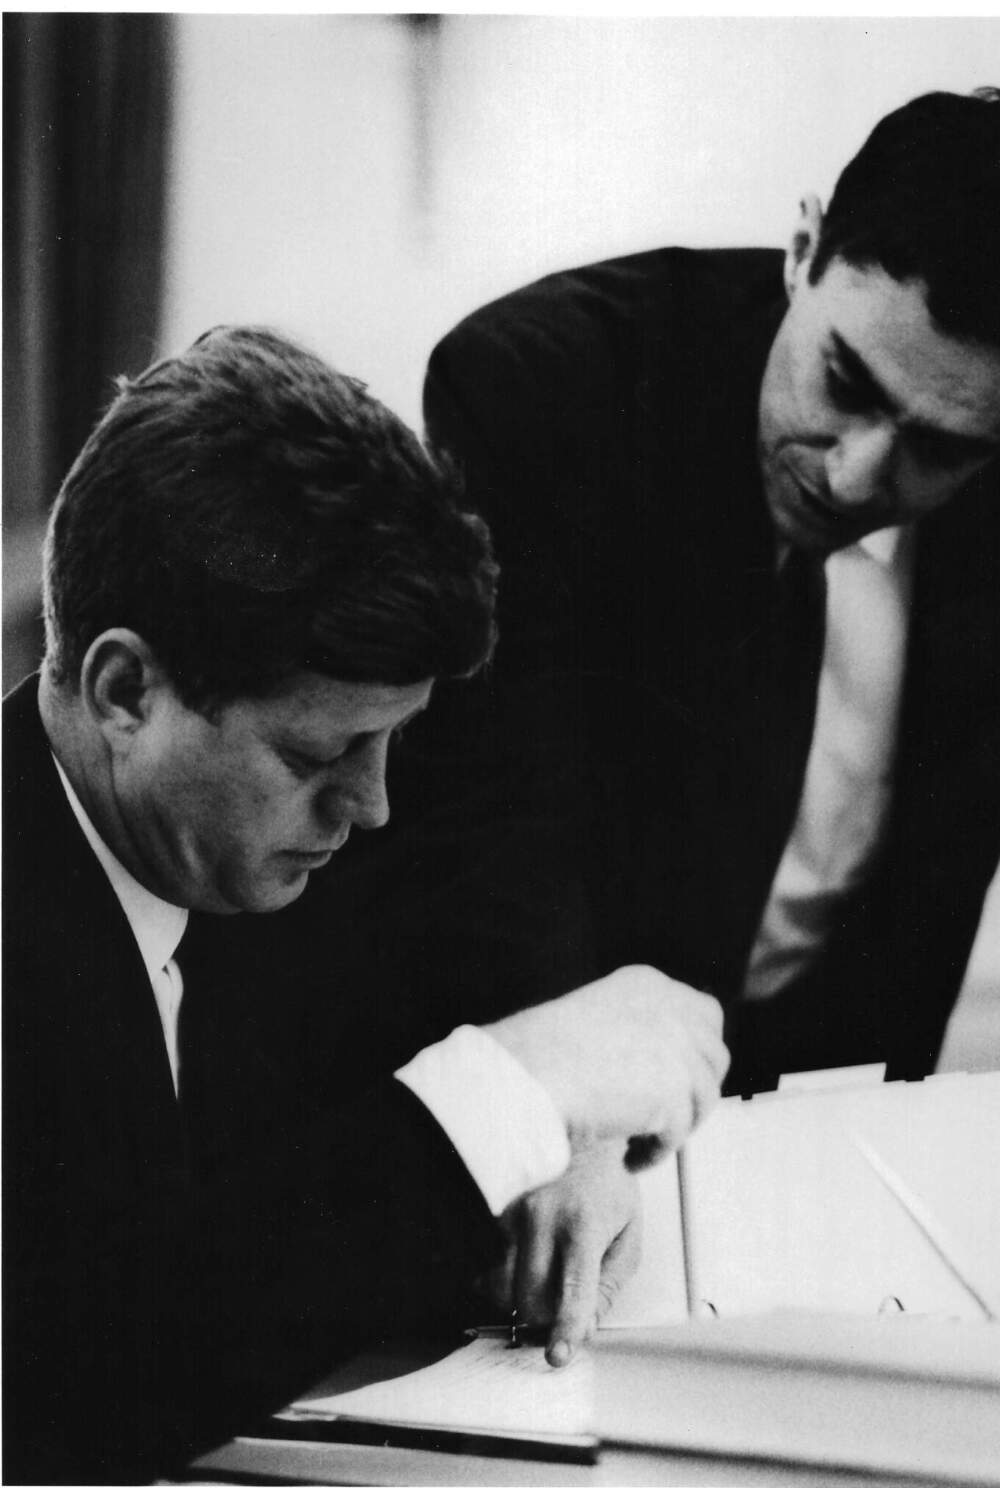 Dick Goodwin leans over the desk as President John F. Kennedy works with him on a speech draft. (Jacques Lowe/Courtesy of the Jacques Lowe Estate)